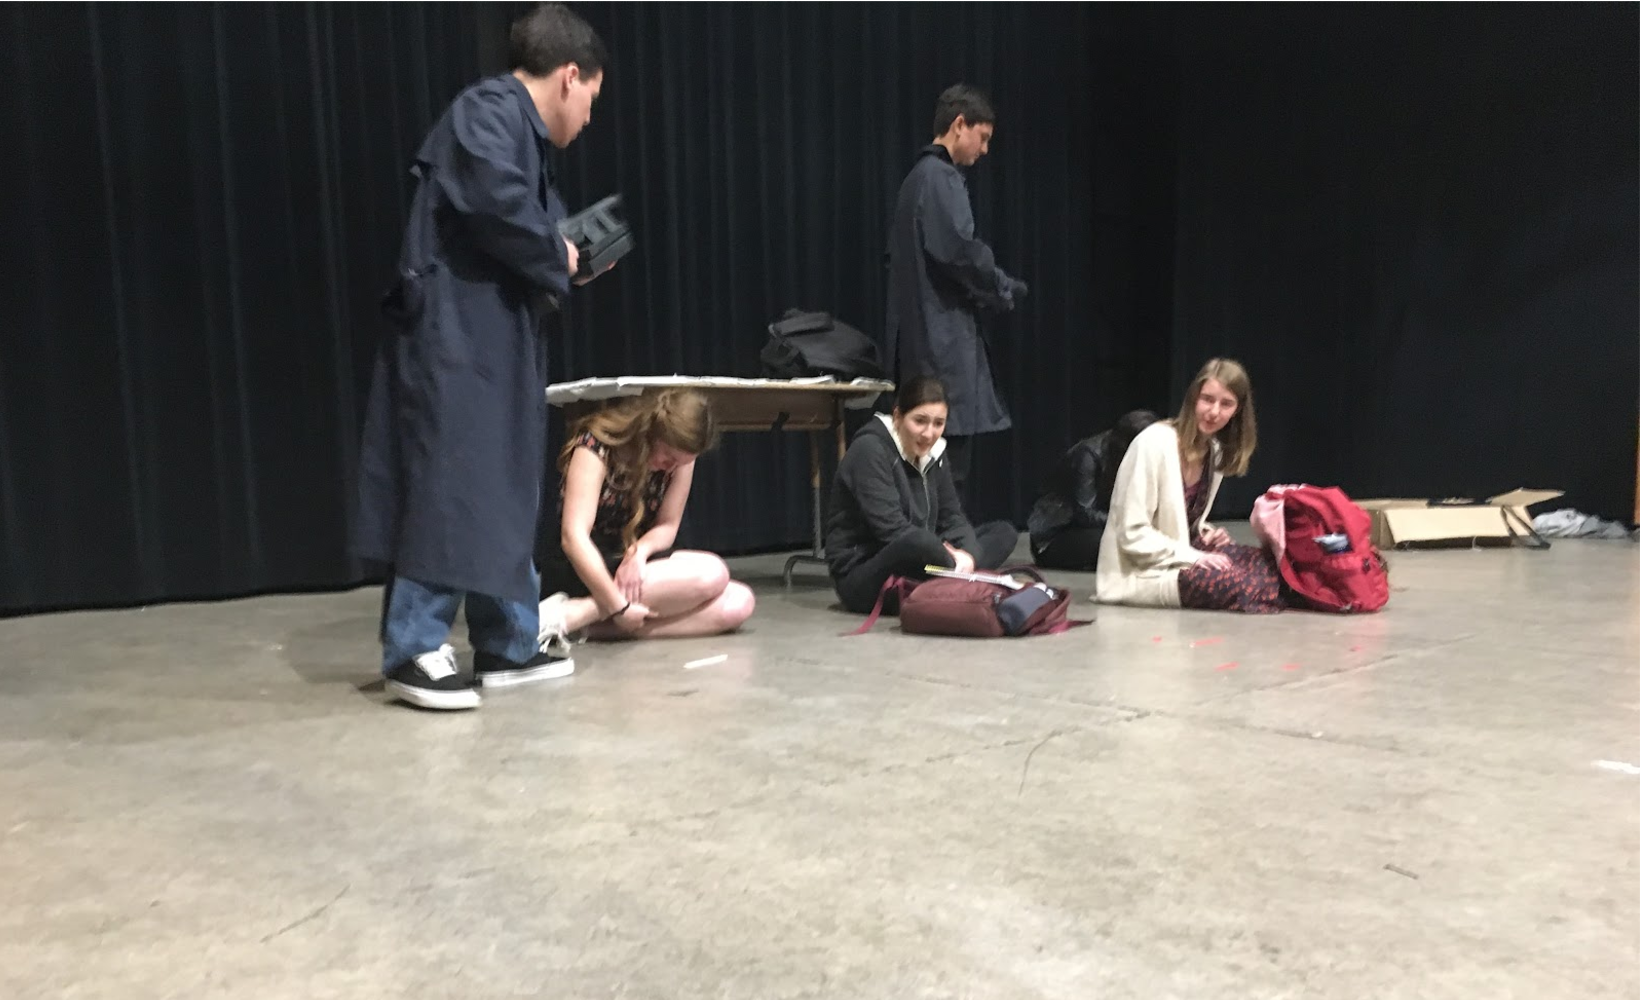  Columbinus , a Contemporary Dramatic one-act play made it to finals. The play is based on the Columbine school shooting. 